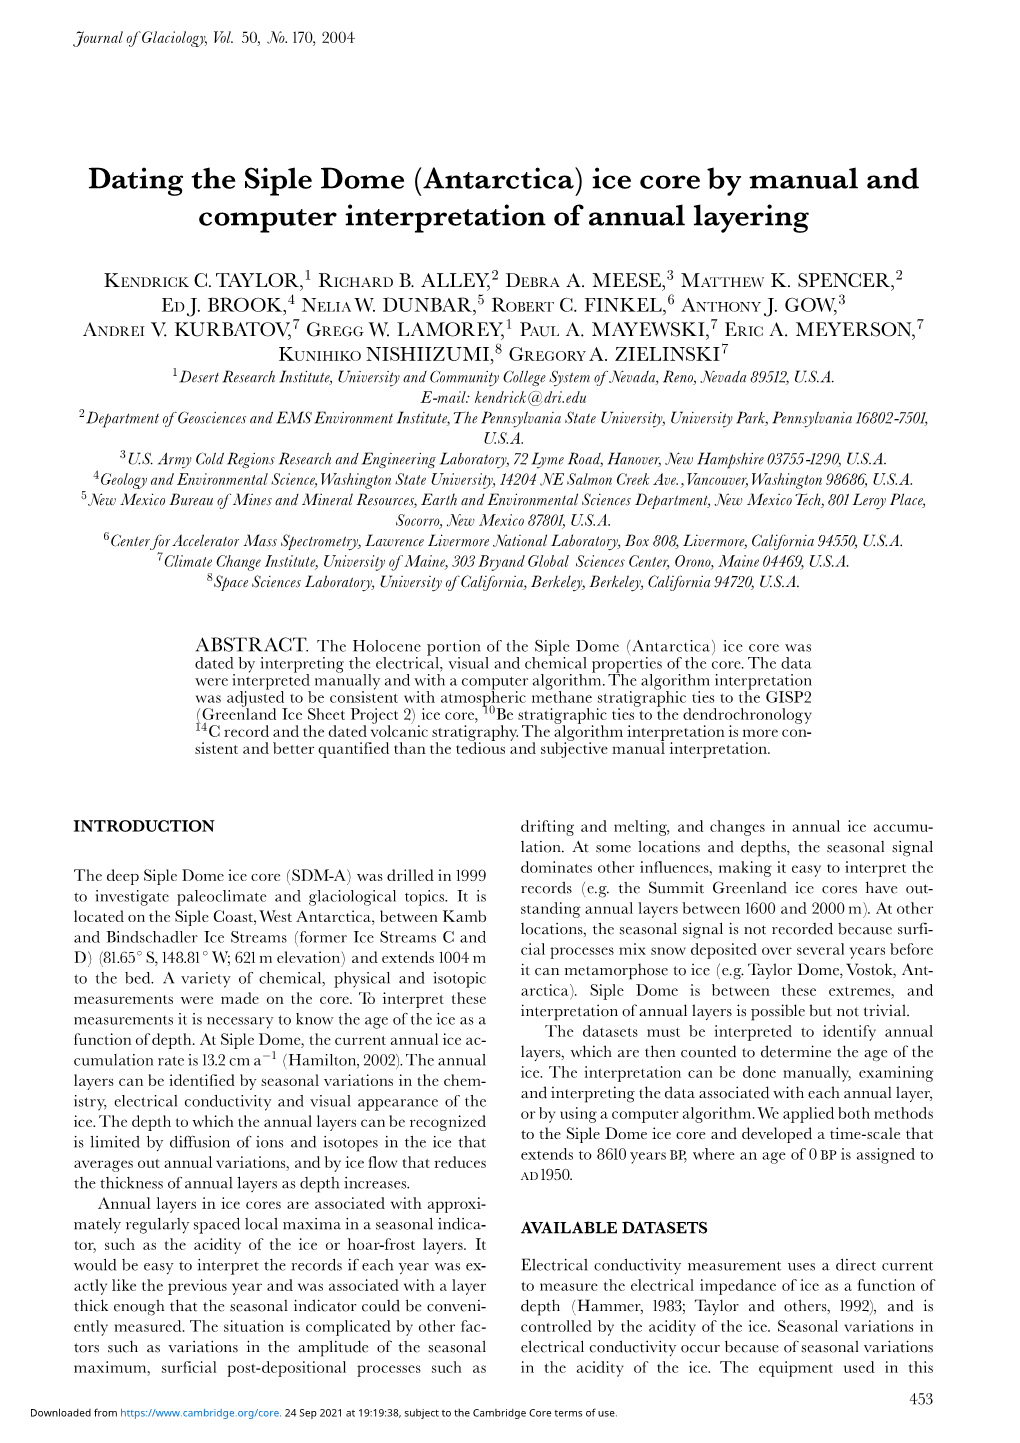 Dating the Siple Dome (Antarctica) Ice Core by Manual and Computer Interpretation of Annual Layering